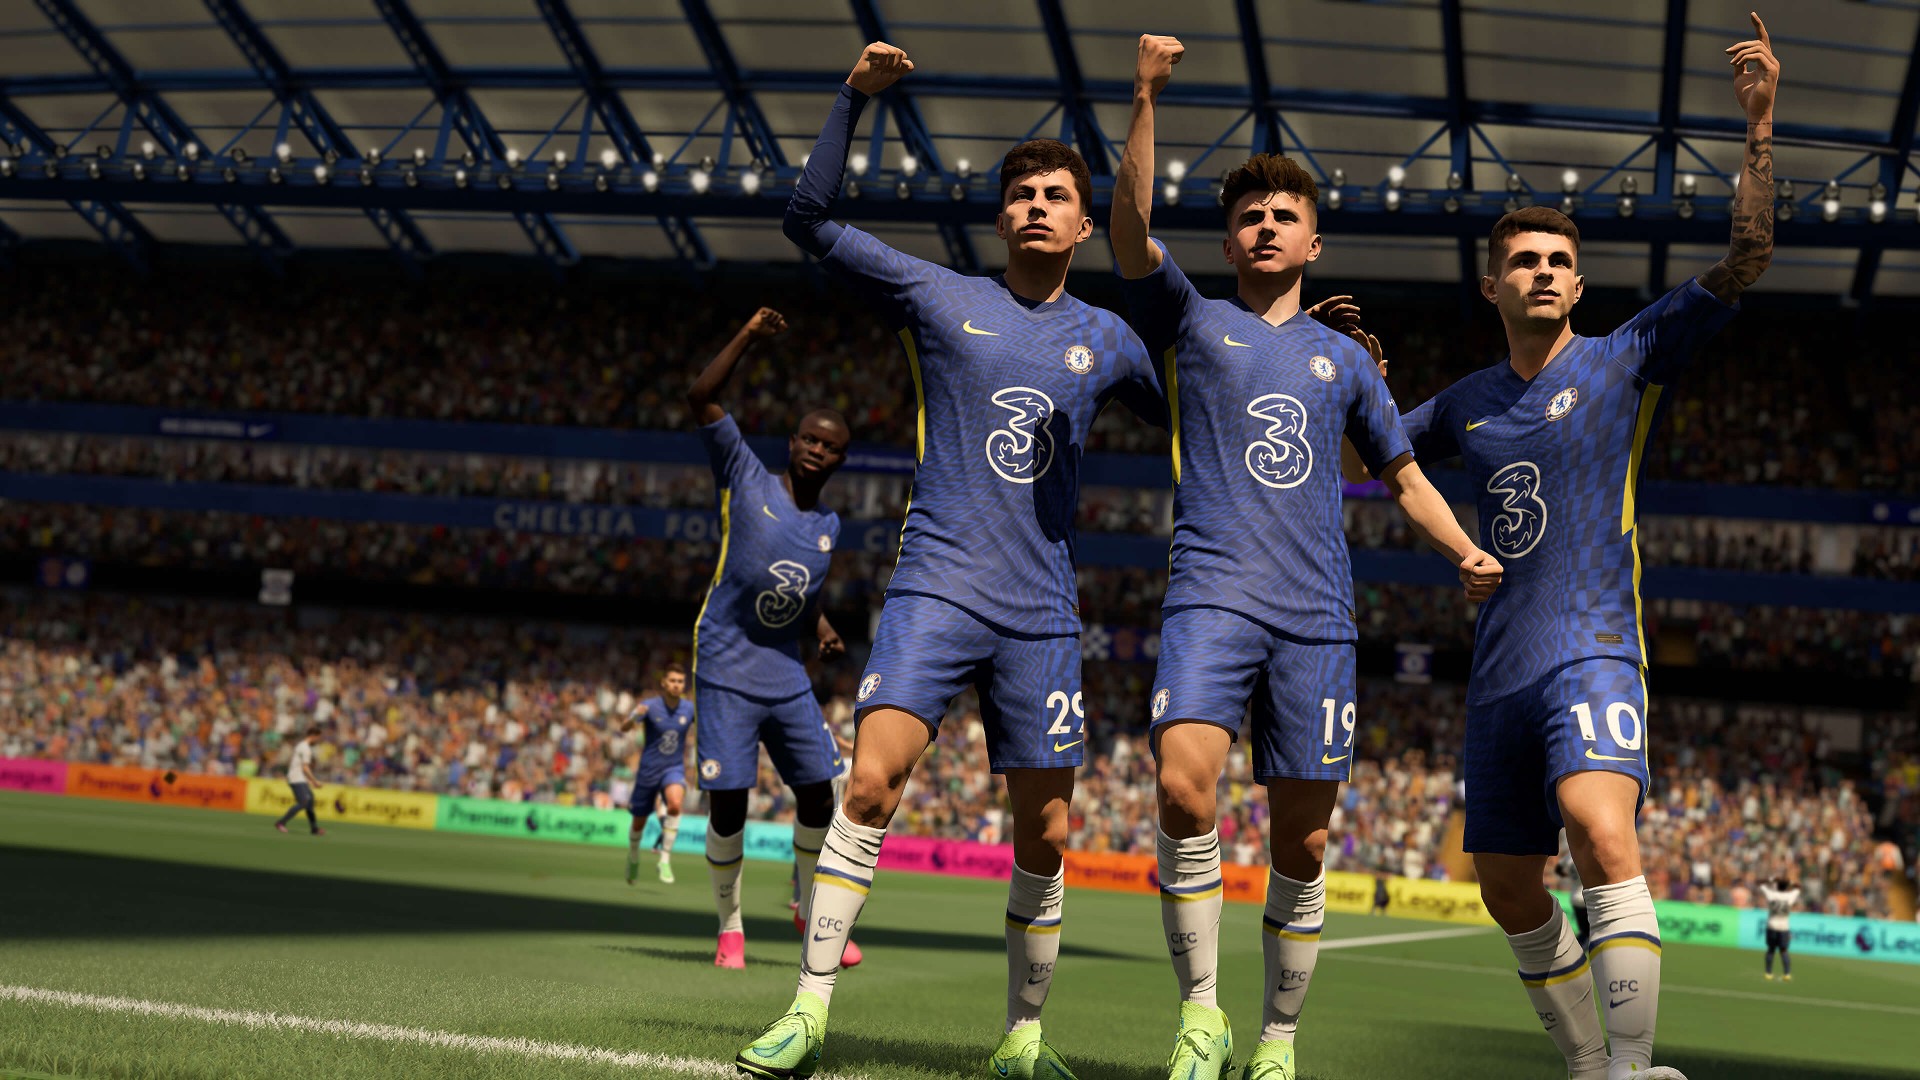 FIFA 22 Ultimate Team - 2200 FIFA Points XBOX One / Xbox Series X|S CD Key